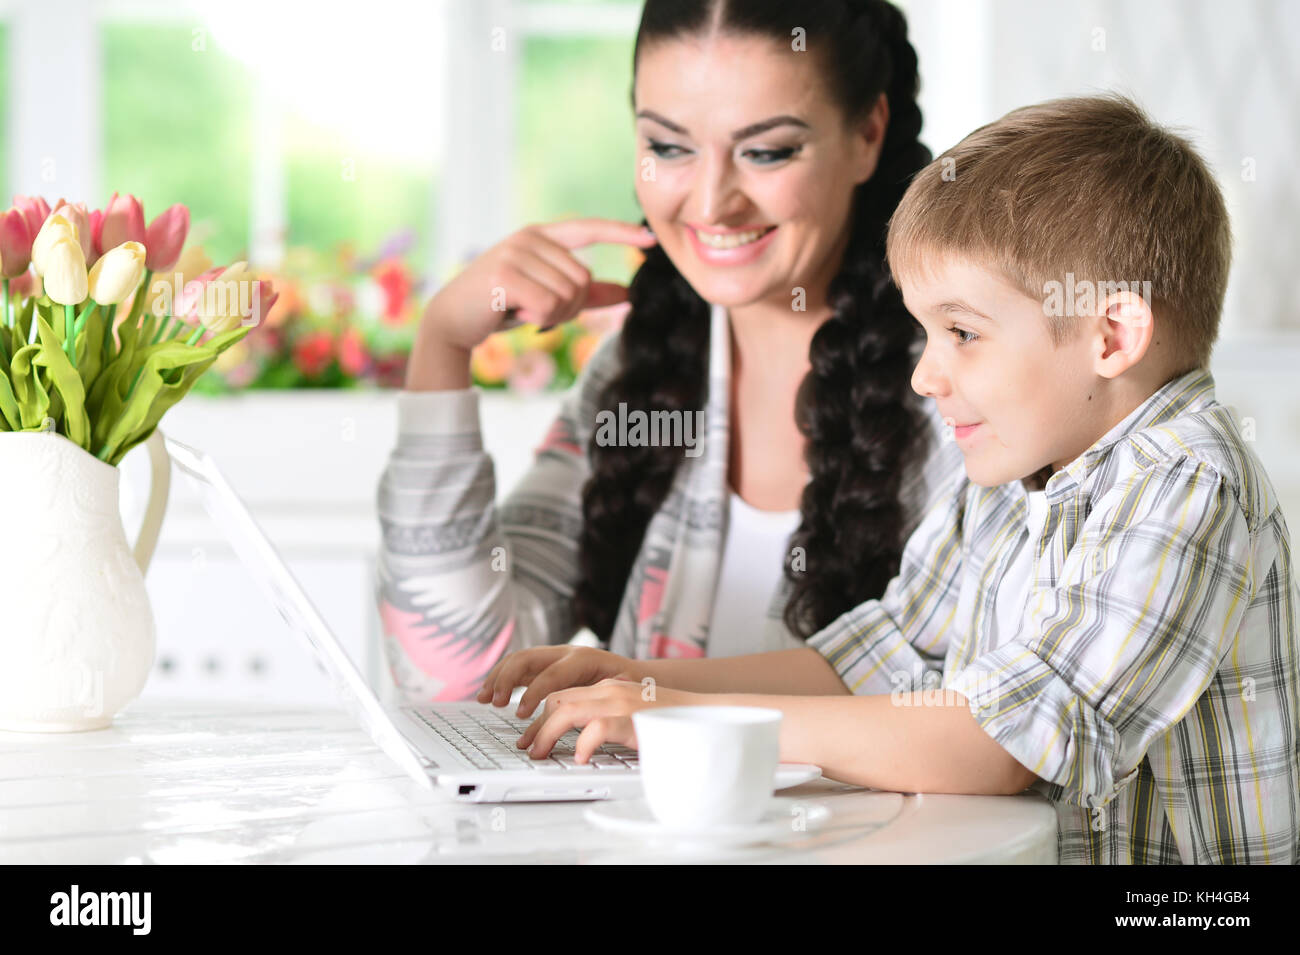 Mother and son using laptop Stock Photo